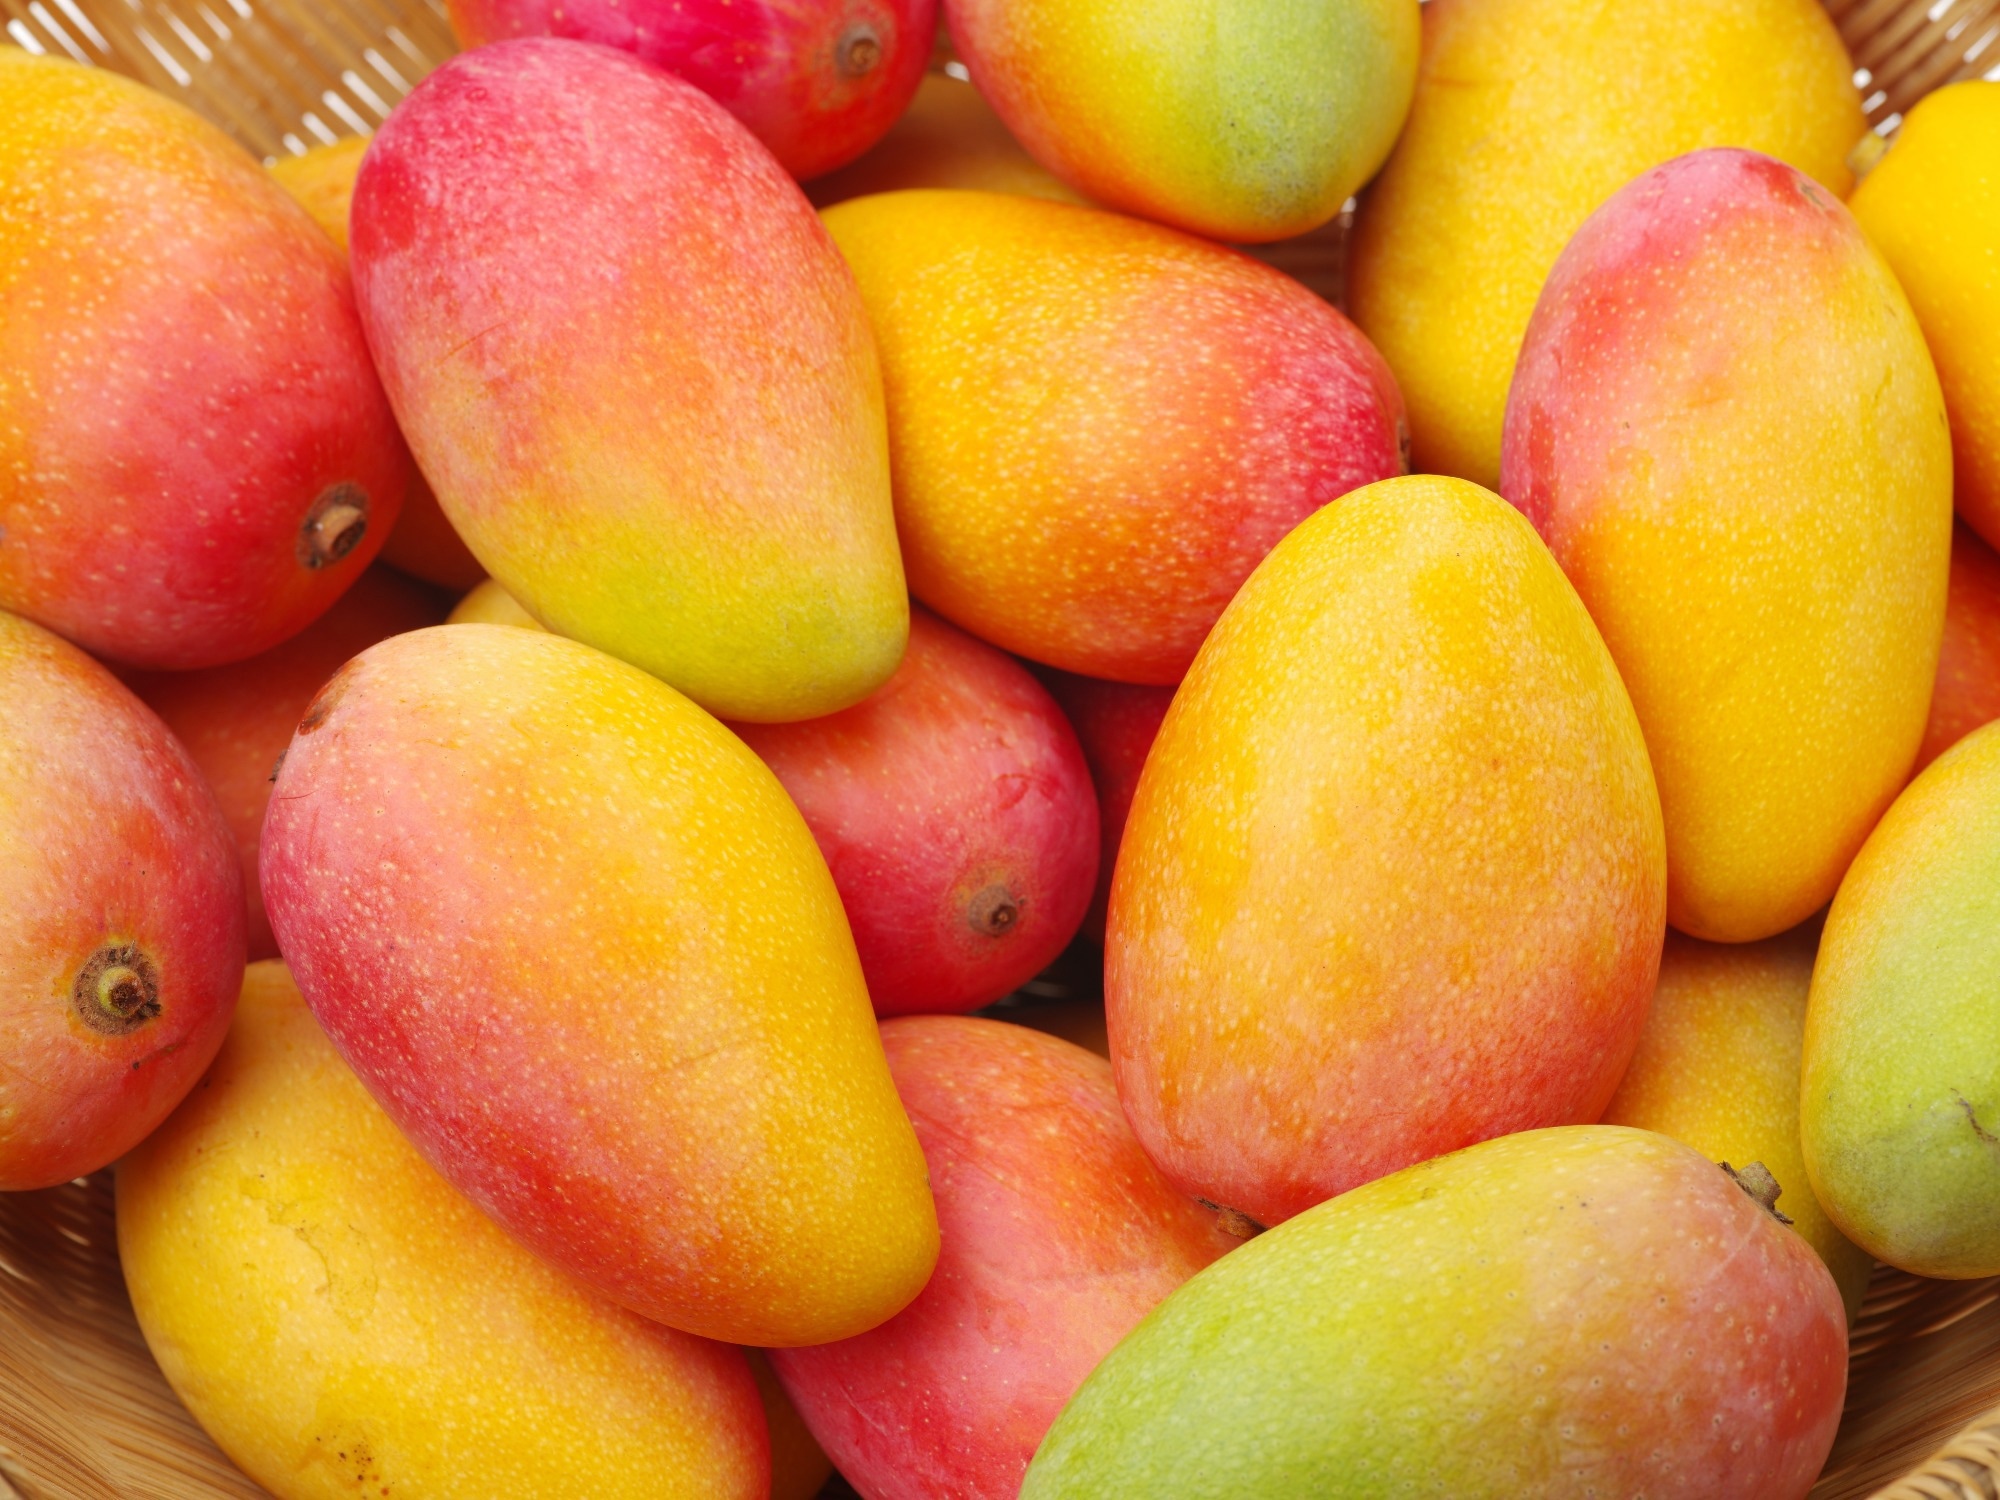 Study: The effects of fresh mango consumption on gut health and microbiome – Randomized controlled trial. Image Credit: JIANG HONGYAN / Shutterstock